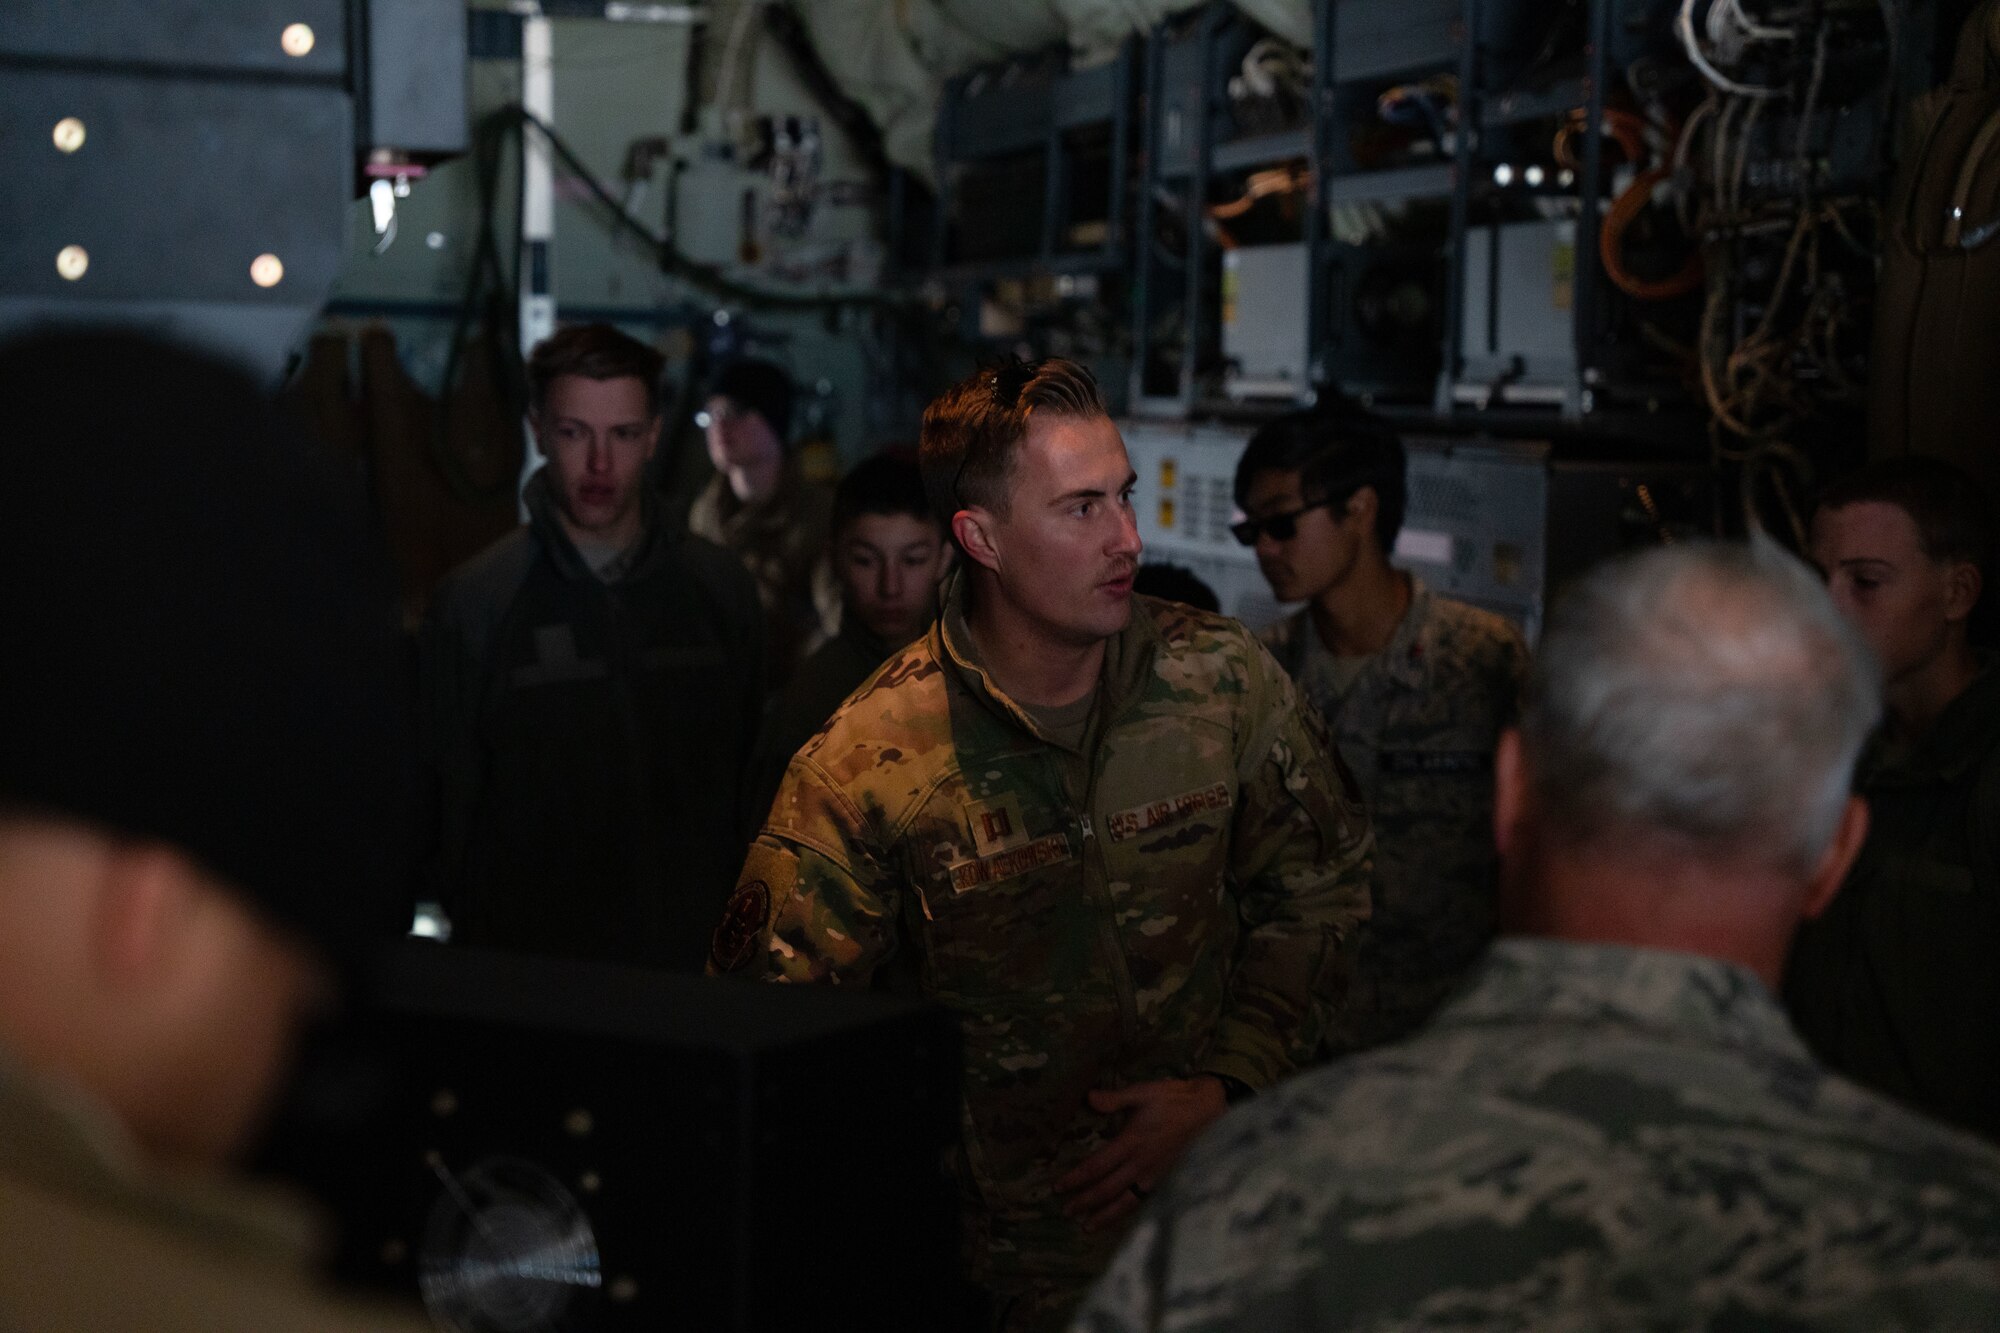 A man in military uniform speaks to a group of people in military uniform inside a military aircraft.